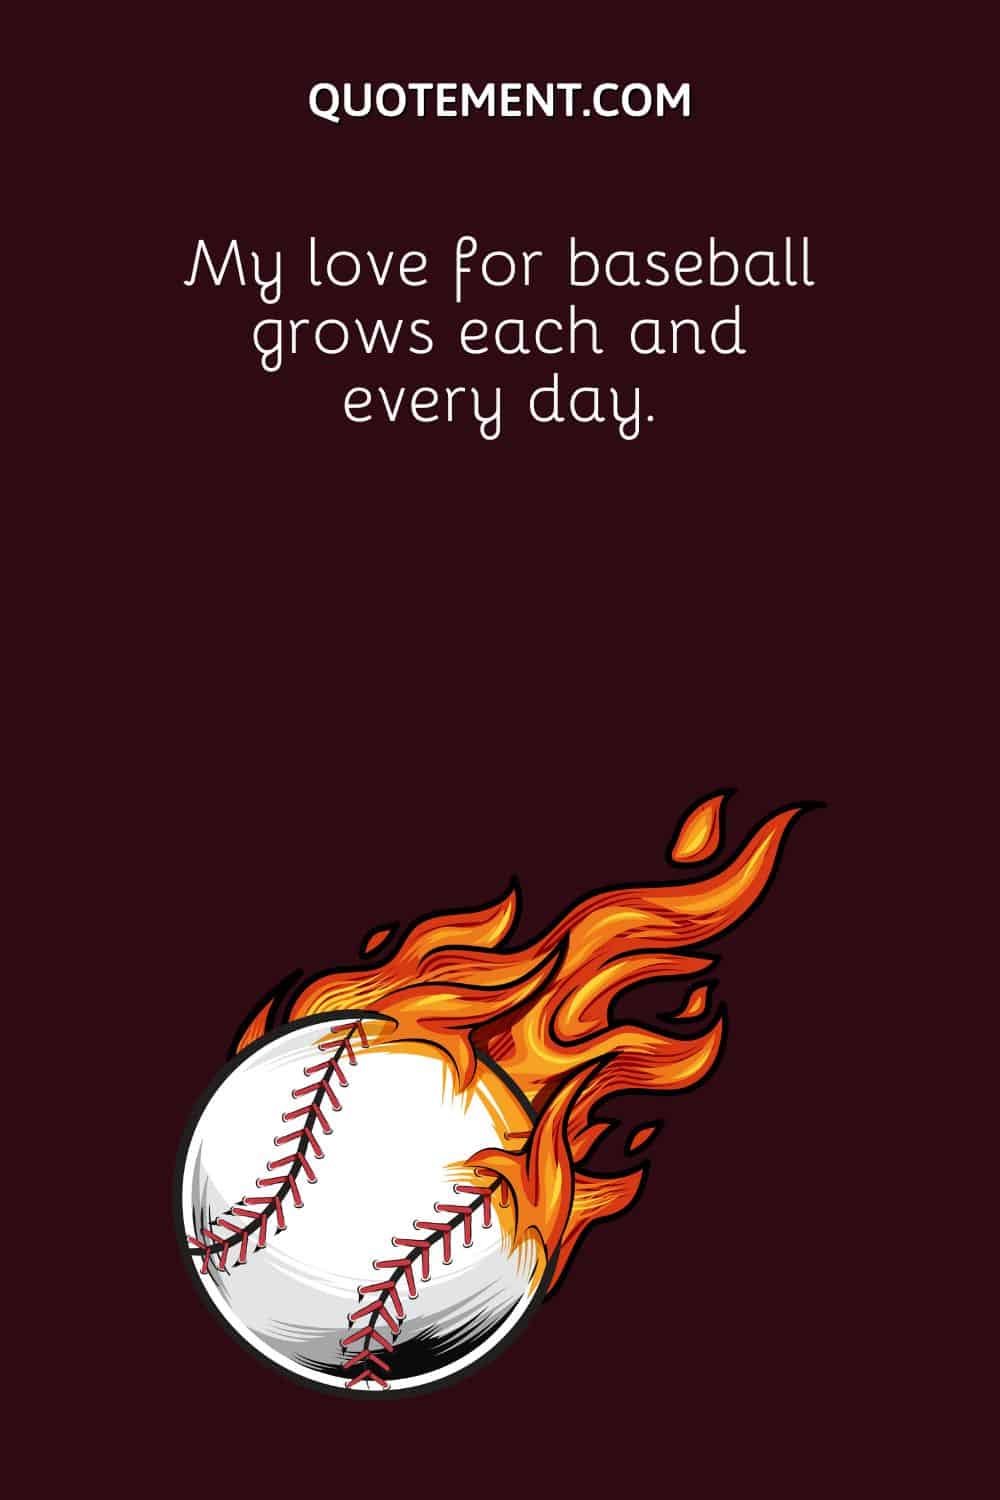 My love for baseball grows each and every day